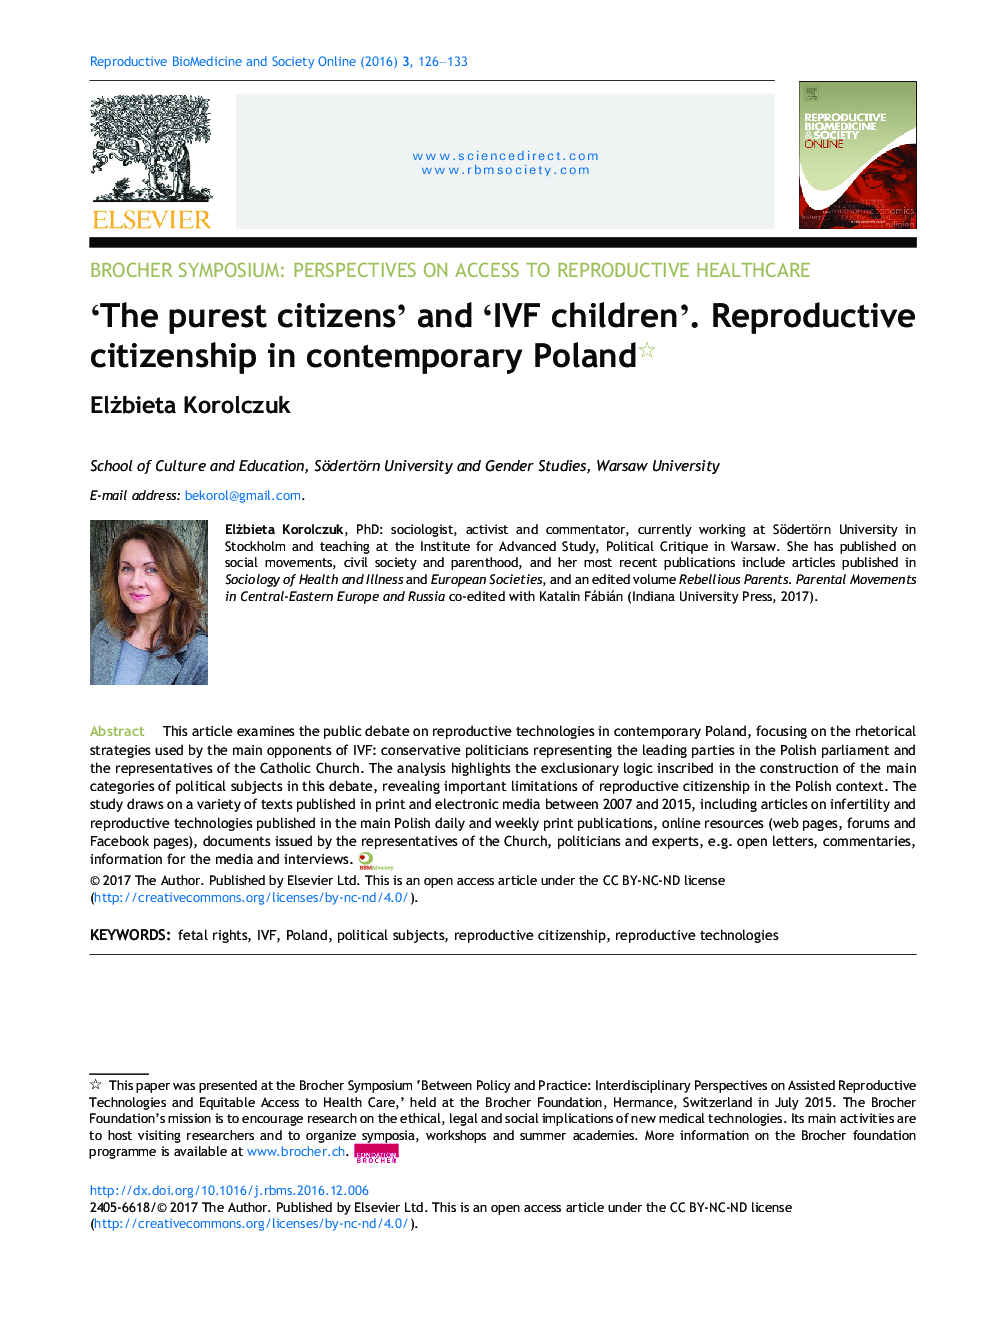 'The purest citizens' and 'IVF children'. Reproductive citizenship in contemporary Poland